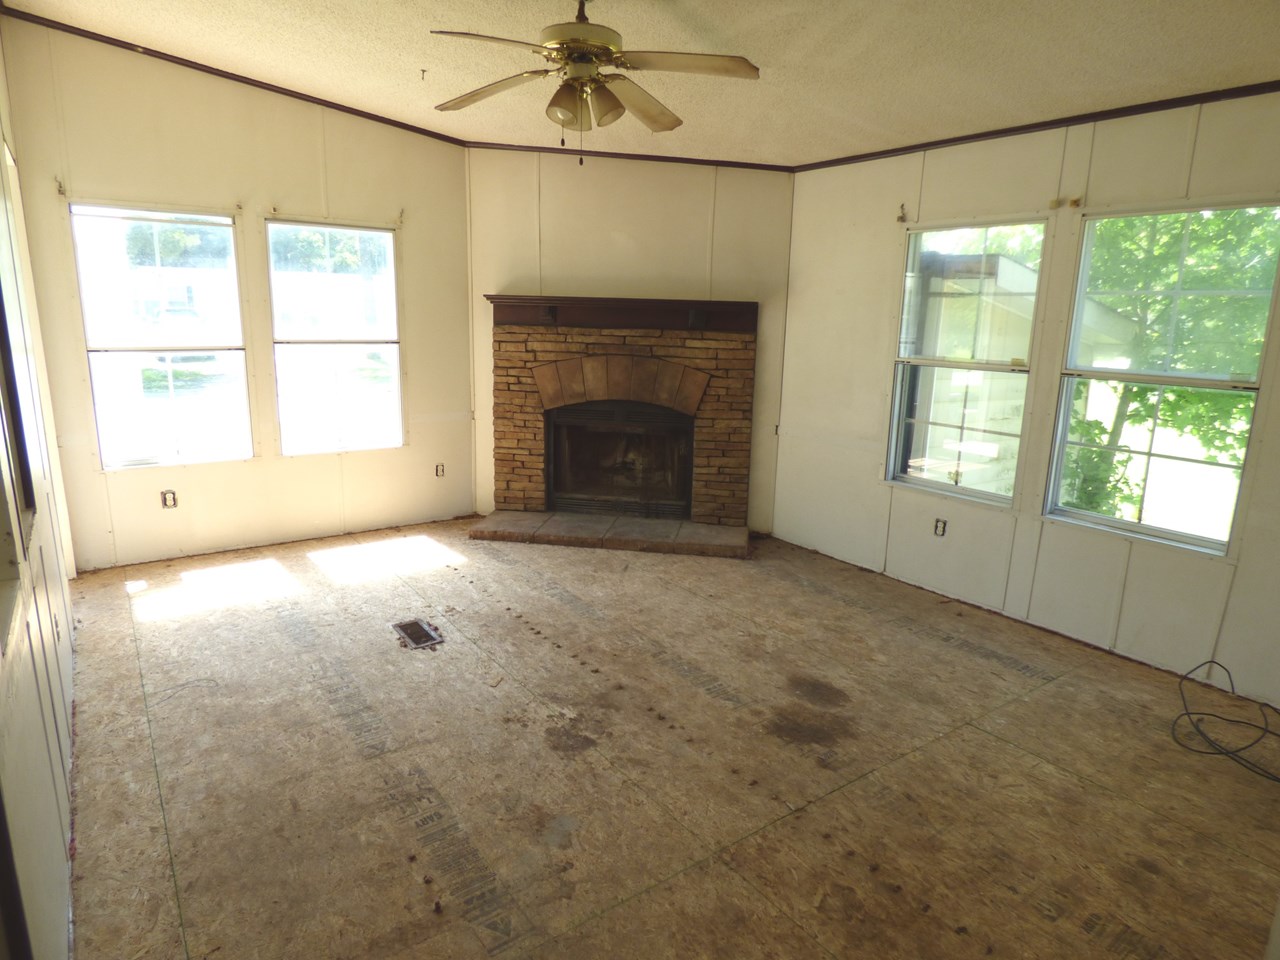 older pic of family room with fireplace (non-working, chimney capped off)